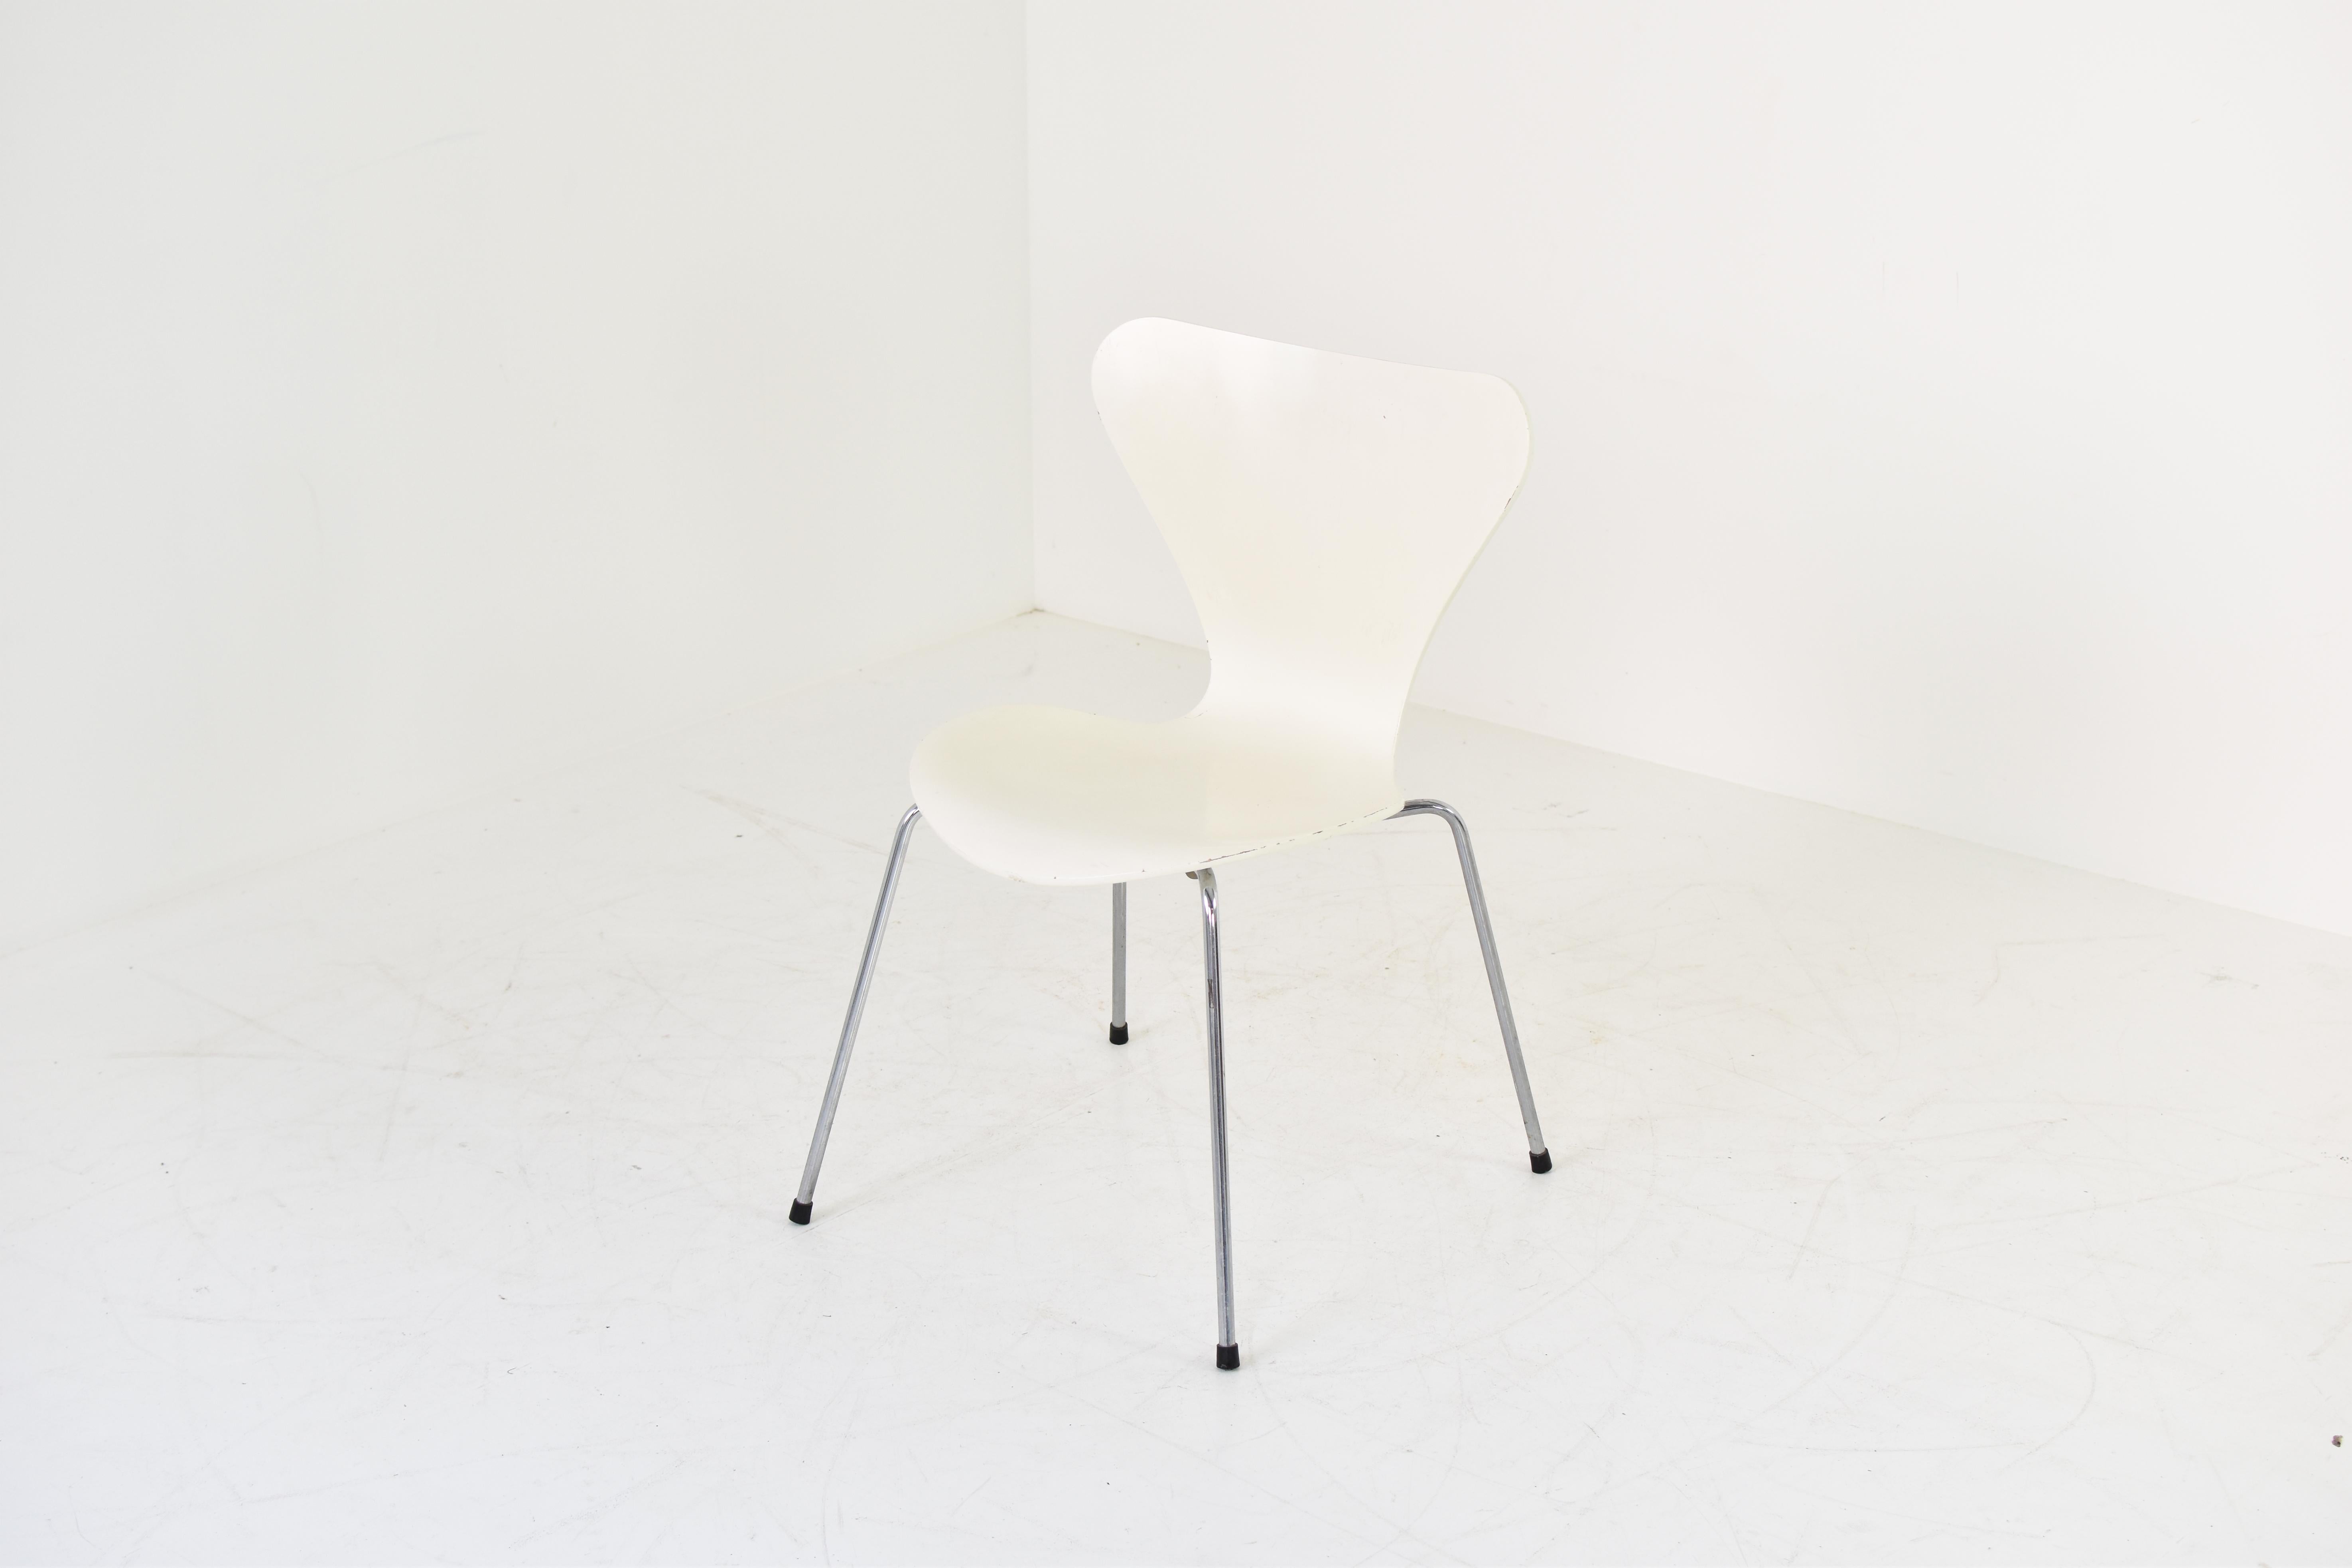 Set dining chairs by Arne Jacobsen for Fritz Hansen, Denmark 1980’s. This is Model No 3107 and features the original plywood seats and thin chromed legs. This chair is sometimes called the butterfly chair due to this unusual, comfortable shape. A